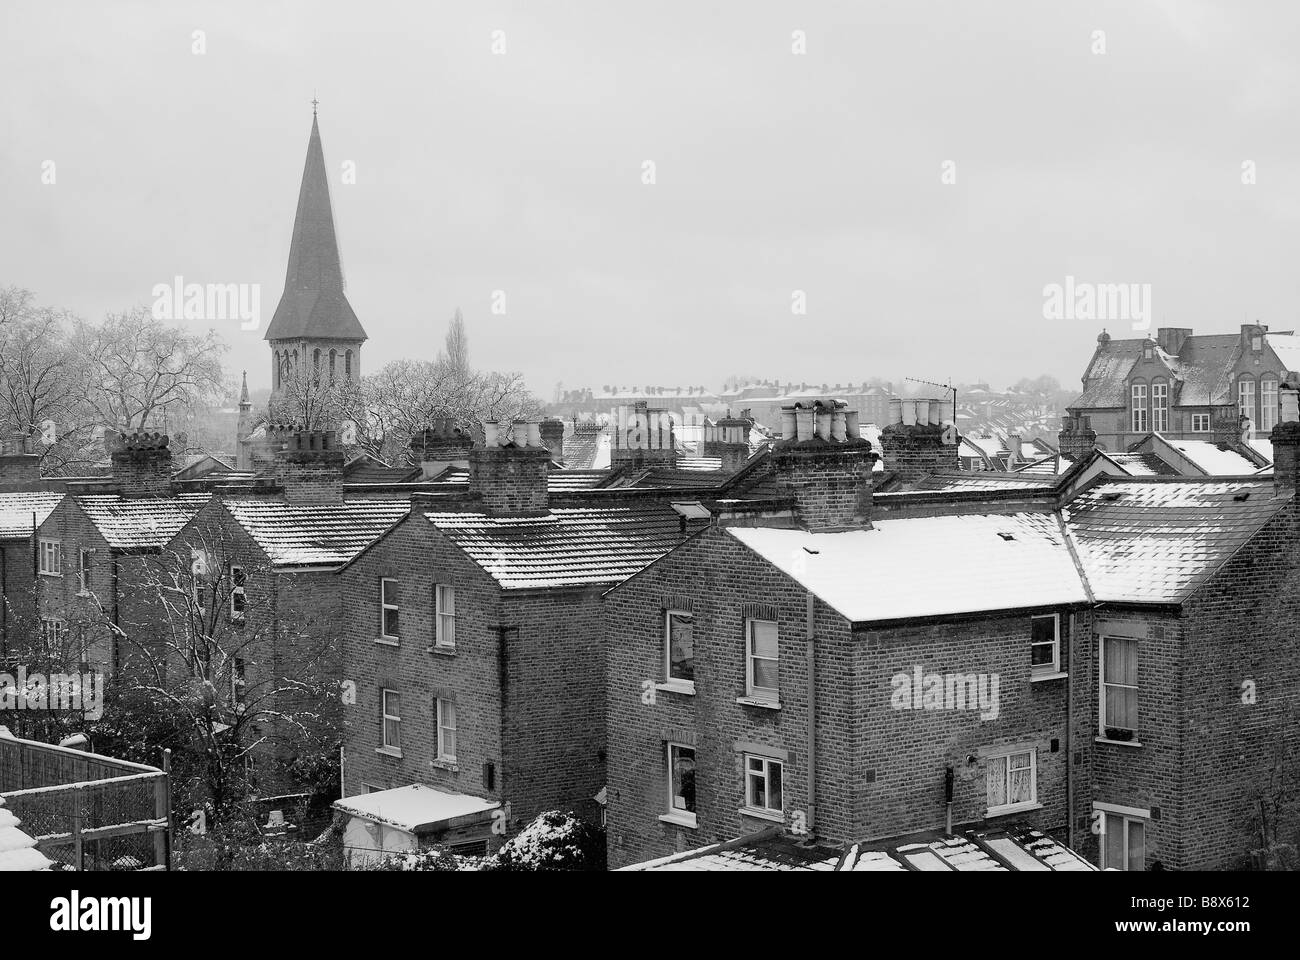 Victorian Houses and church spire in  the London suburb of East Dulwich, London UK, in winter, with snow on roofs Stock Photo